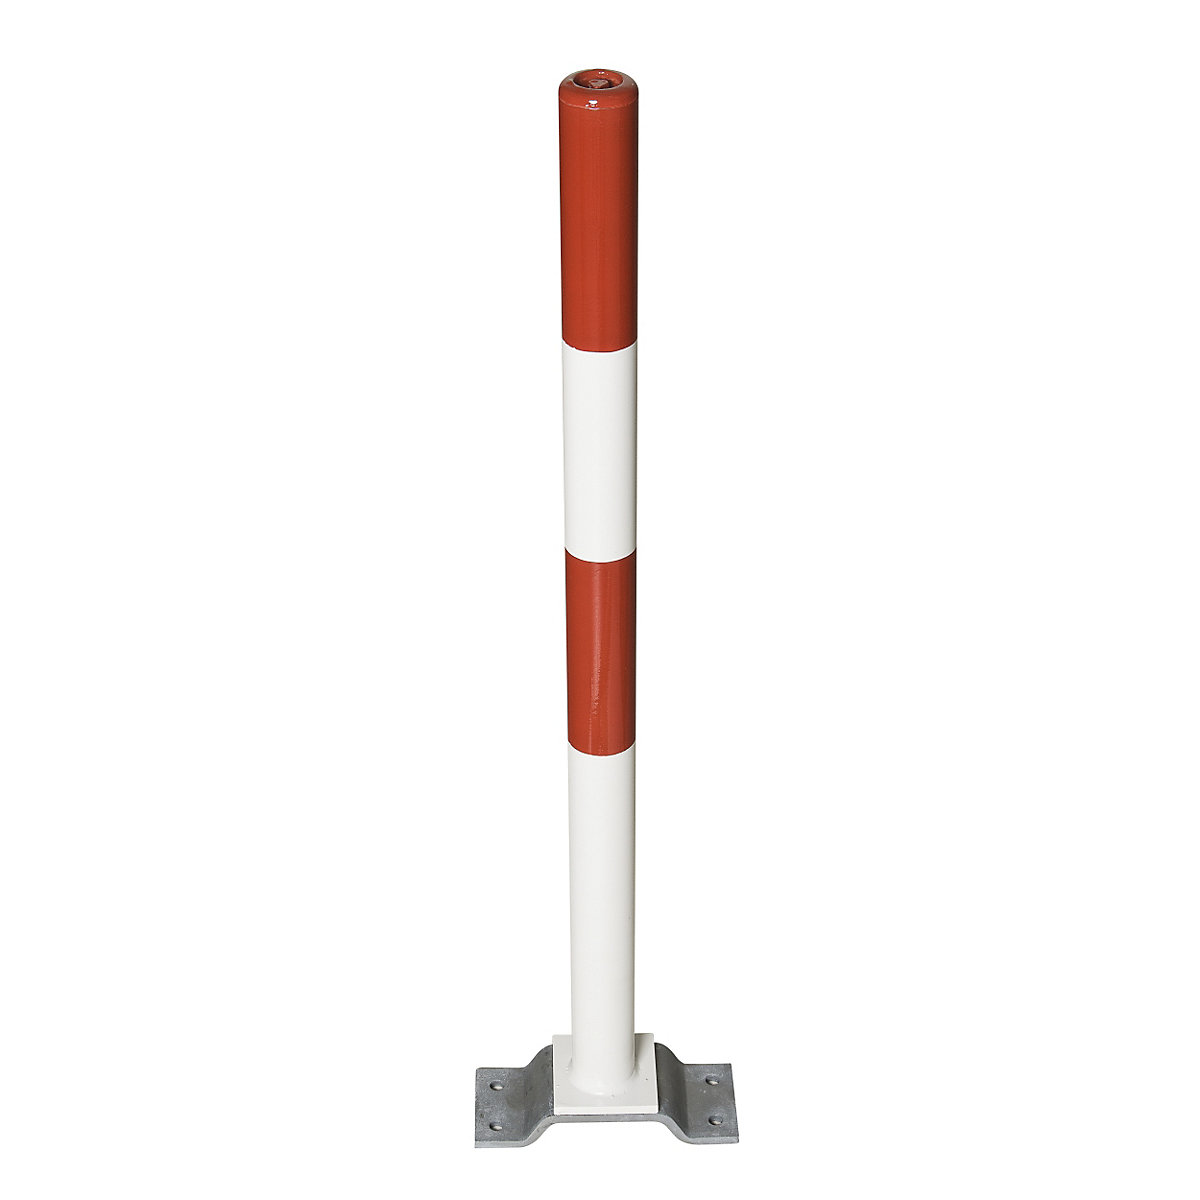 Barrier post made of steel, for bolting in place, Ø 60 mm, red/white, 1 chain eyelet-10